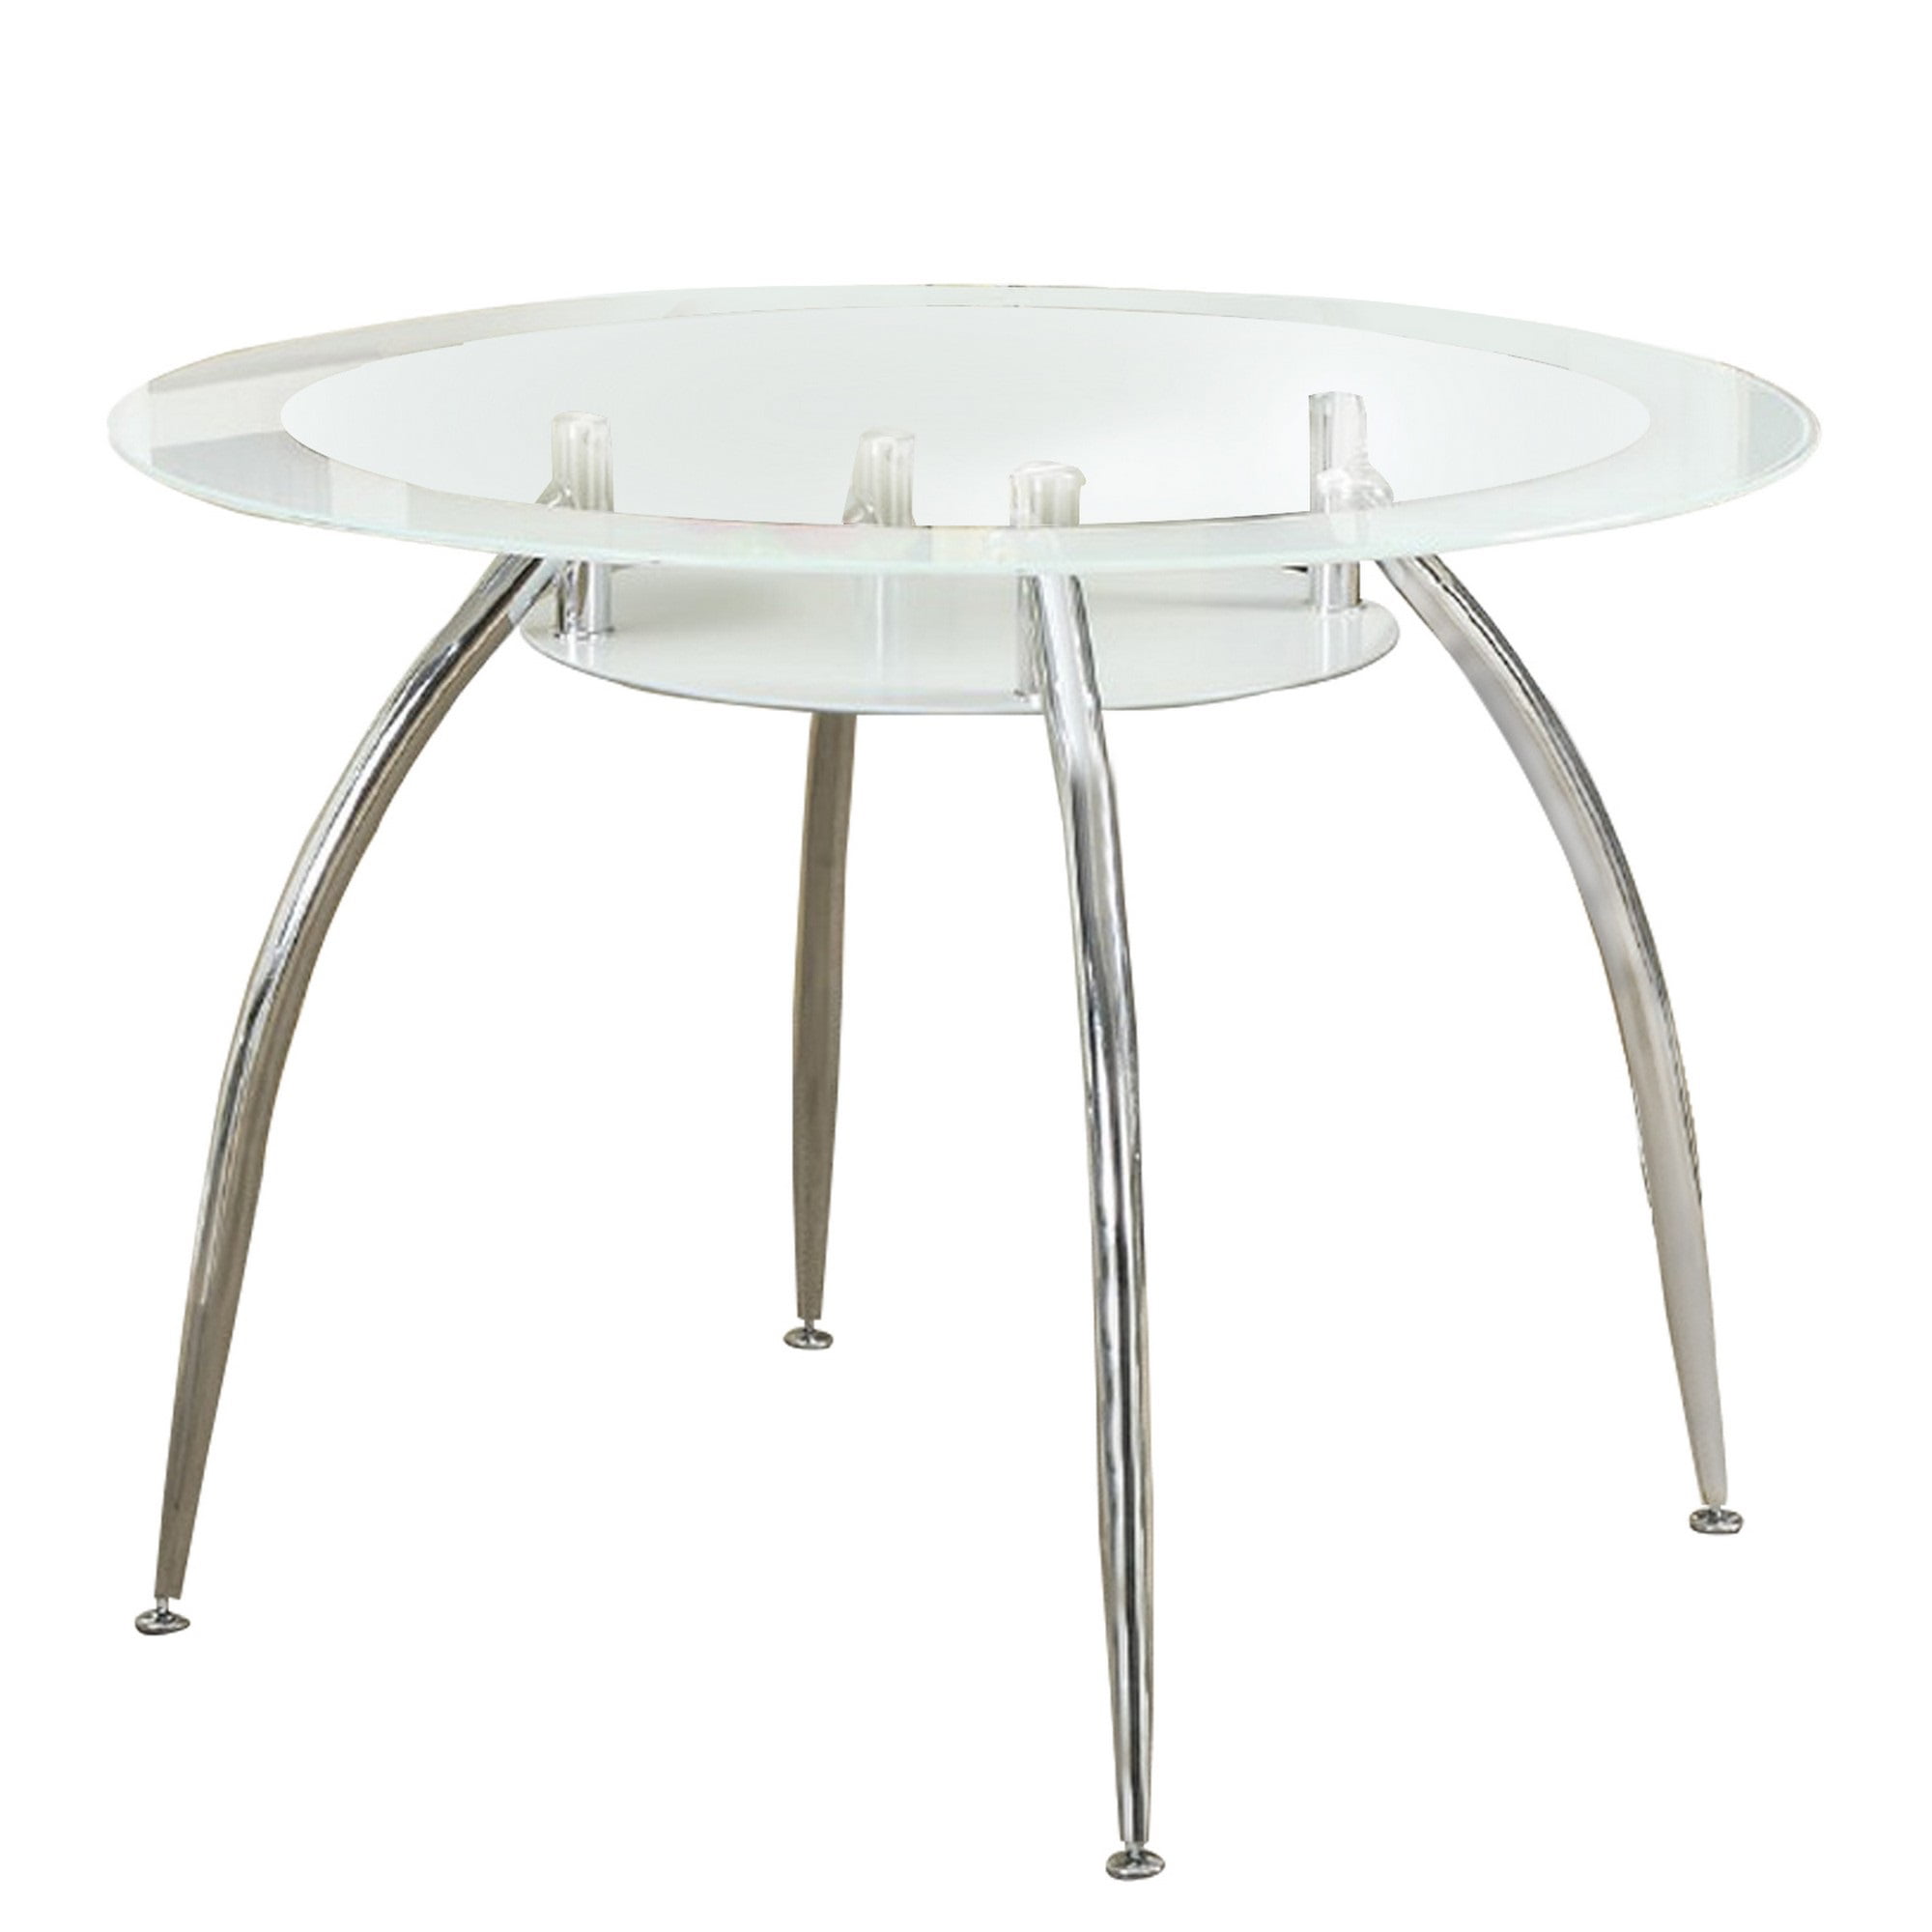 Living Room Small Kitchen Table for Dining Room Glass Dining Table Nopurs Glass Round Dining Table with Metal Legs 